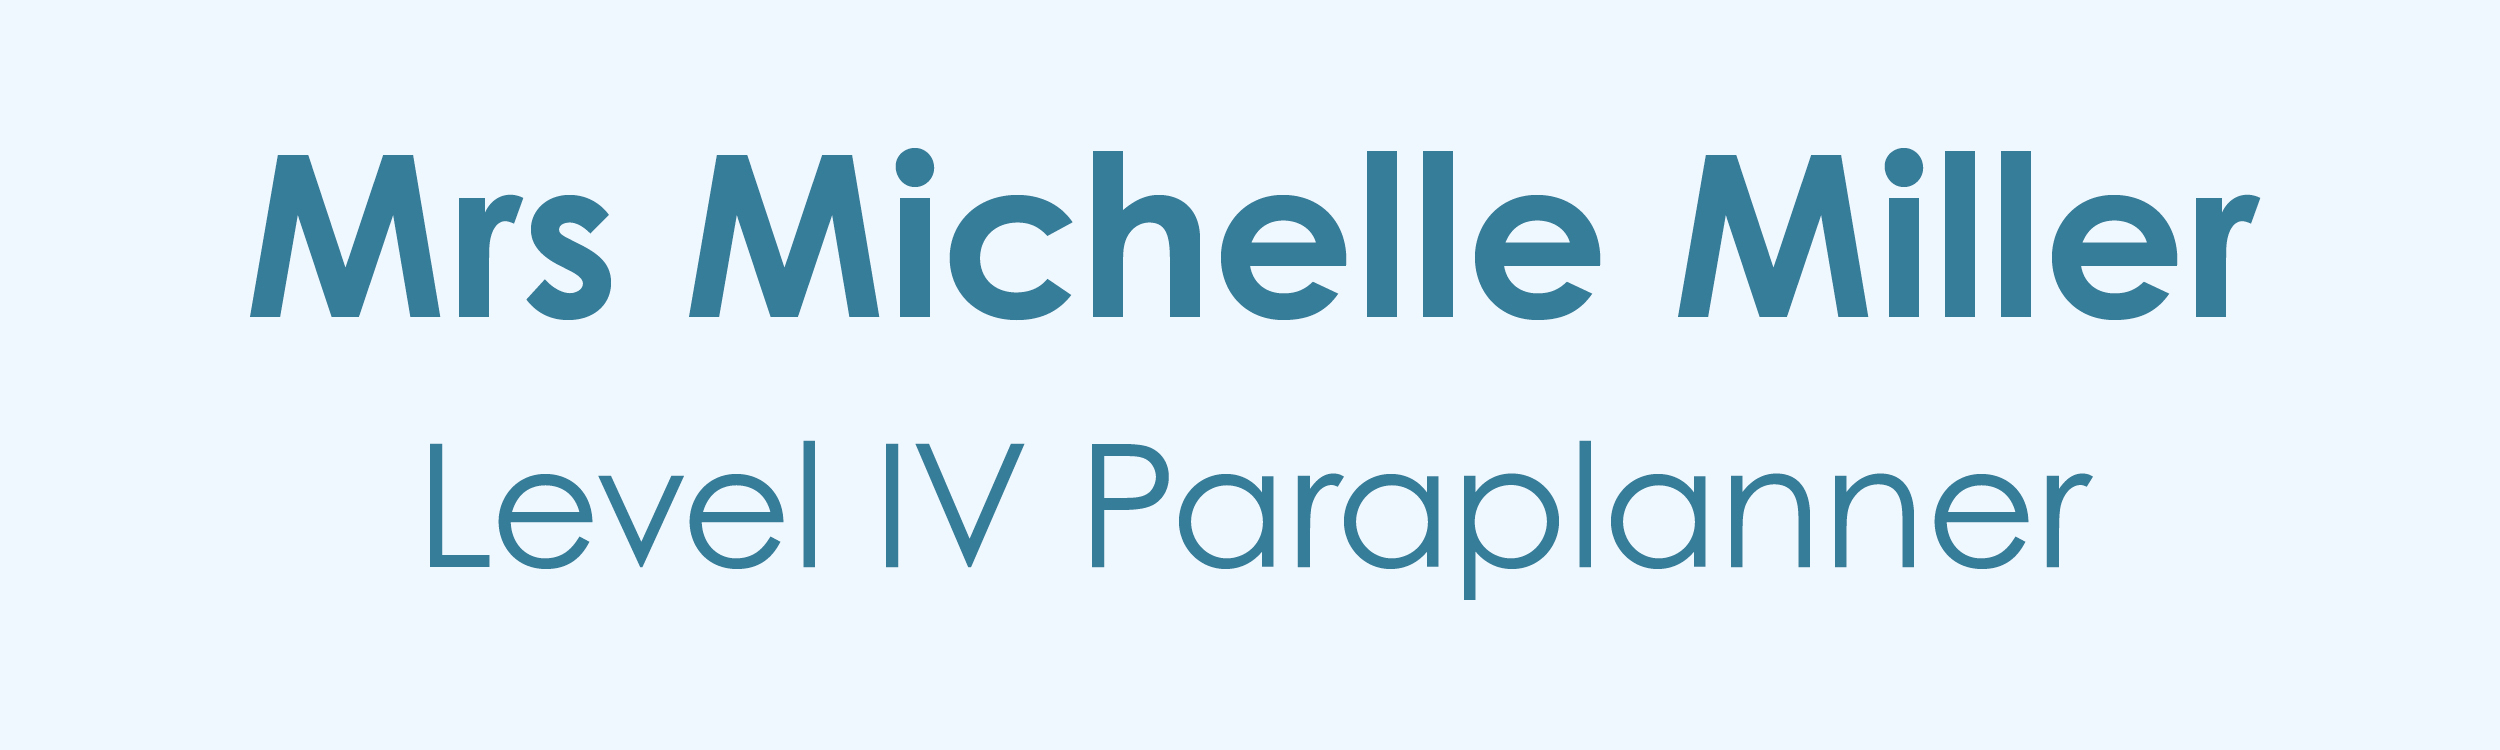 A title plaque for the picture of Mrs Michelle Miller, Paraplanner